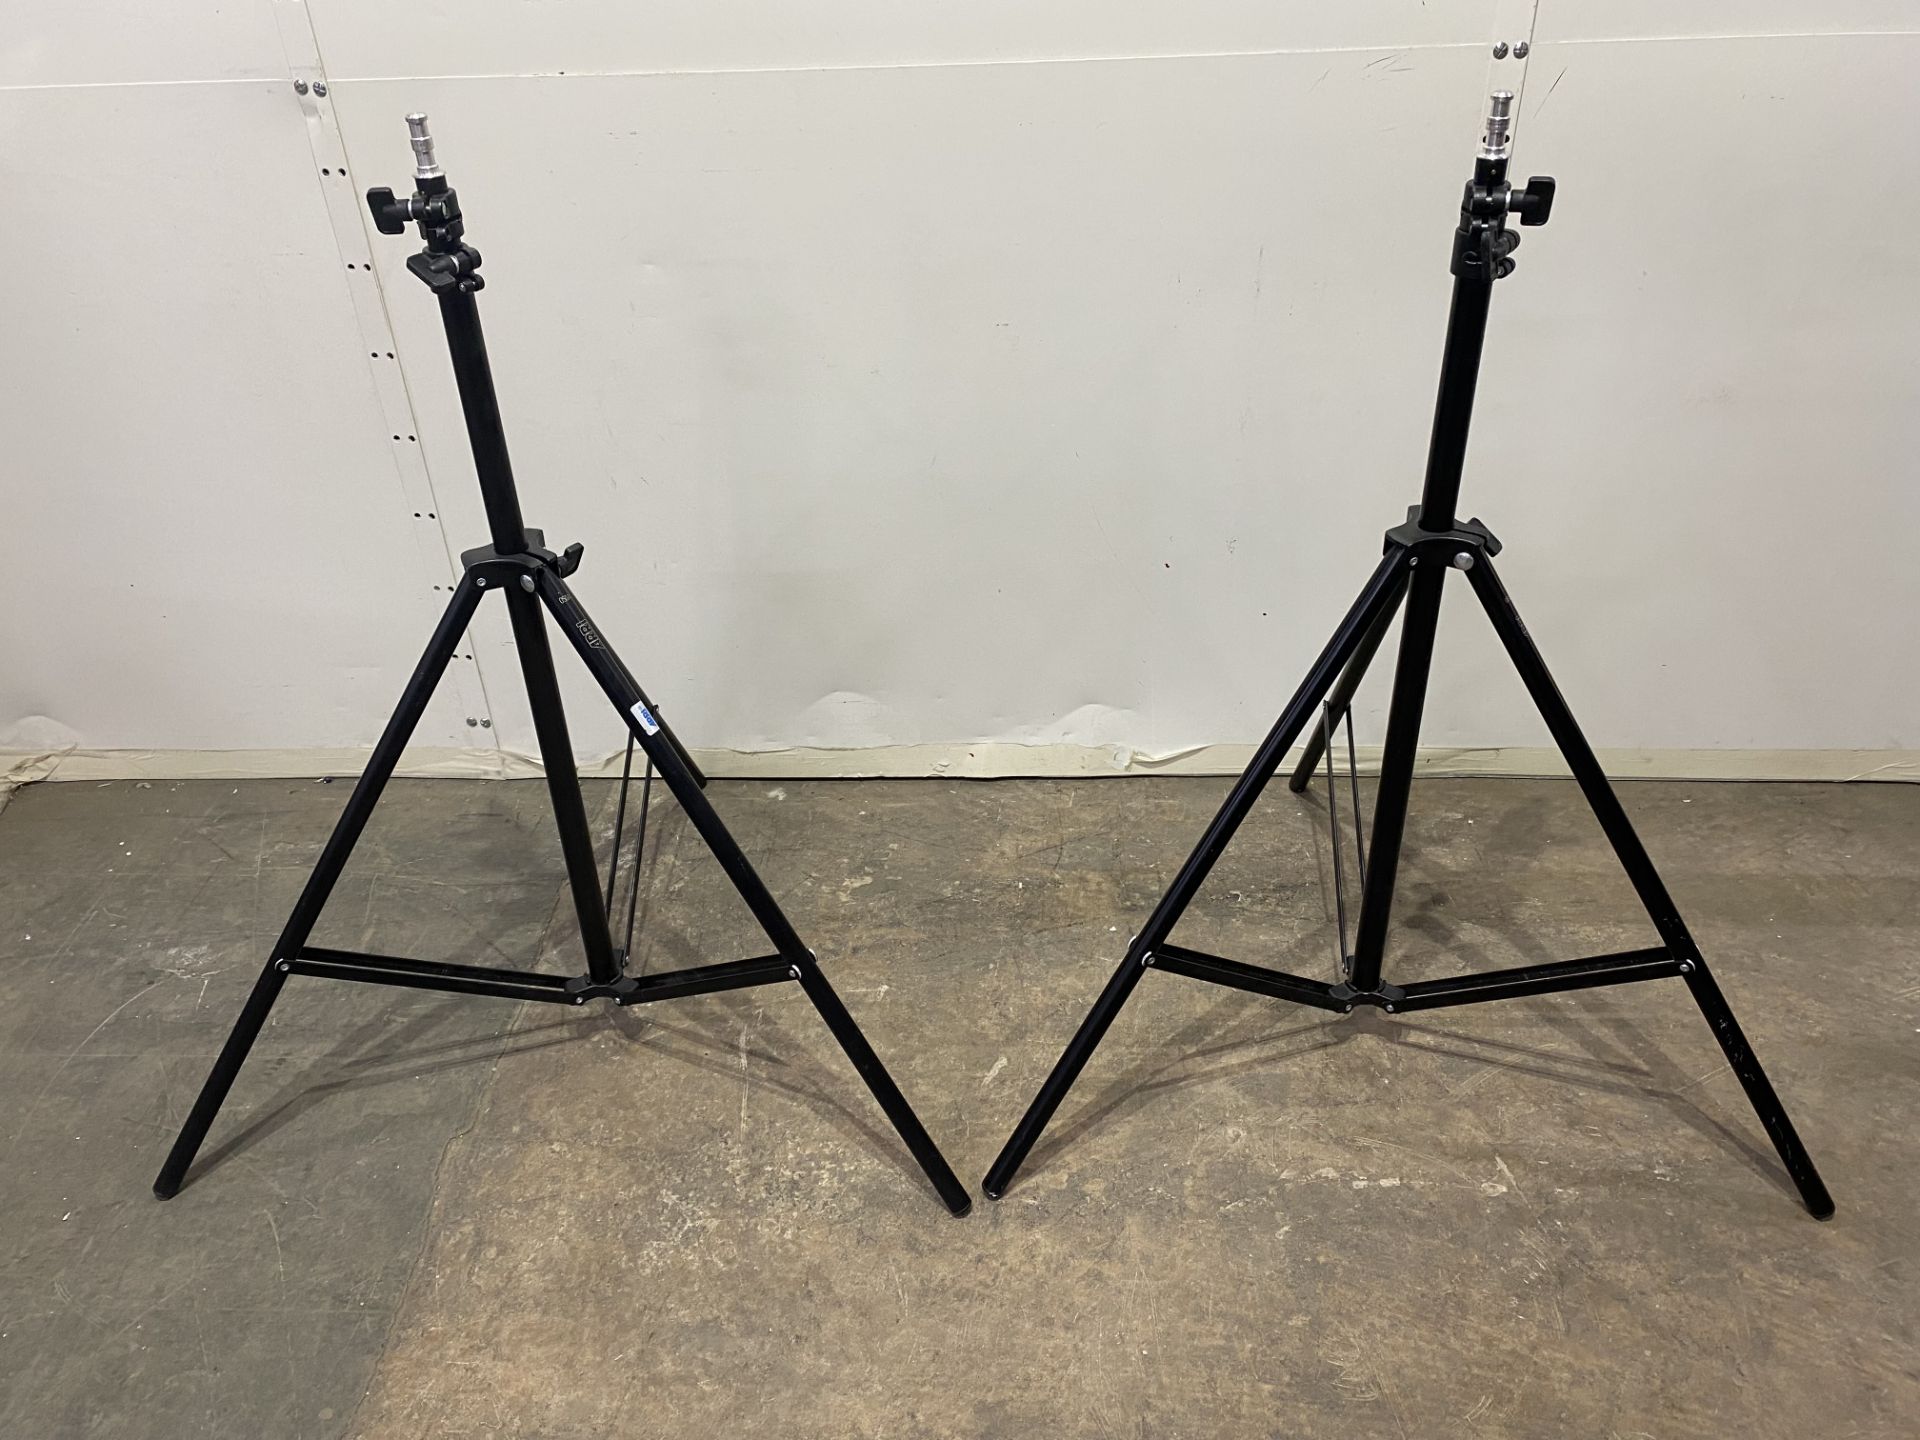 2 x Arri 050A Portable Lighting Stands/Tripods